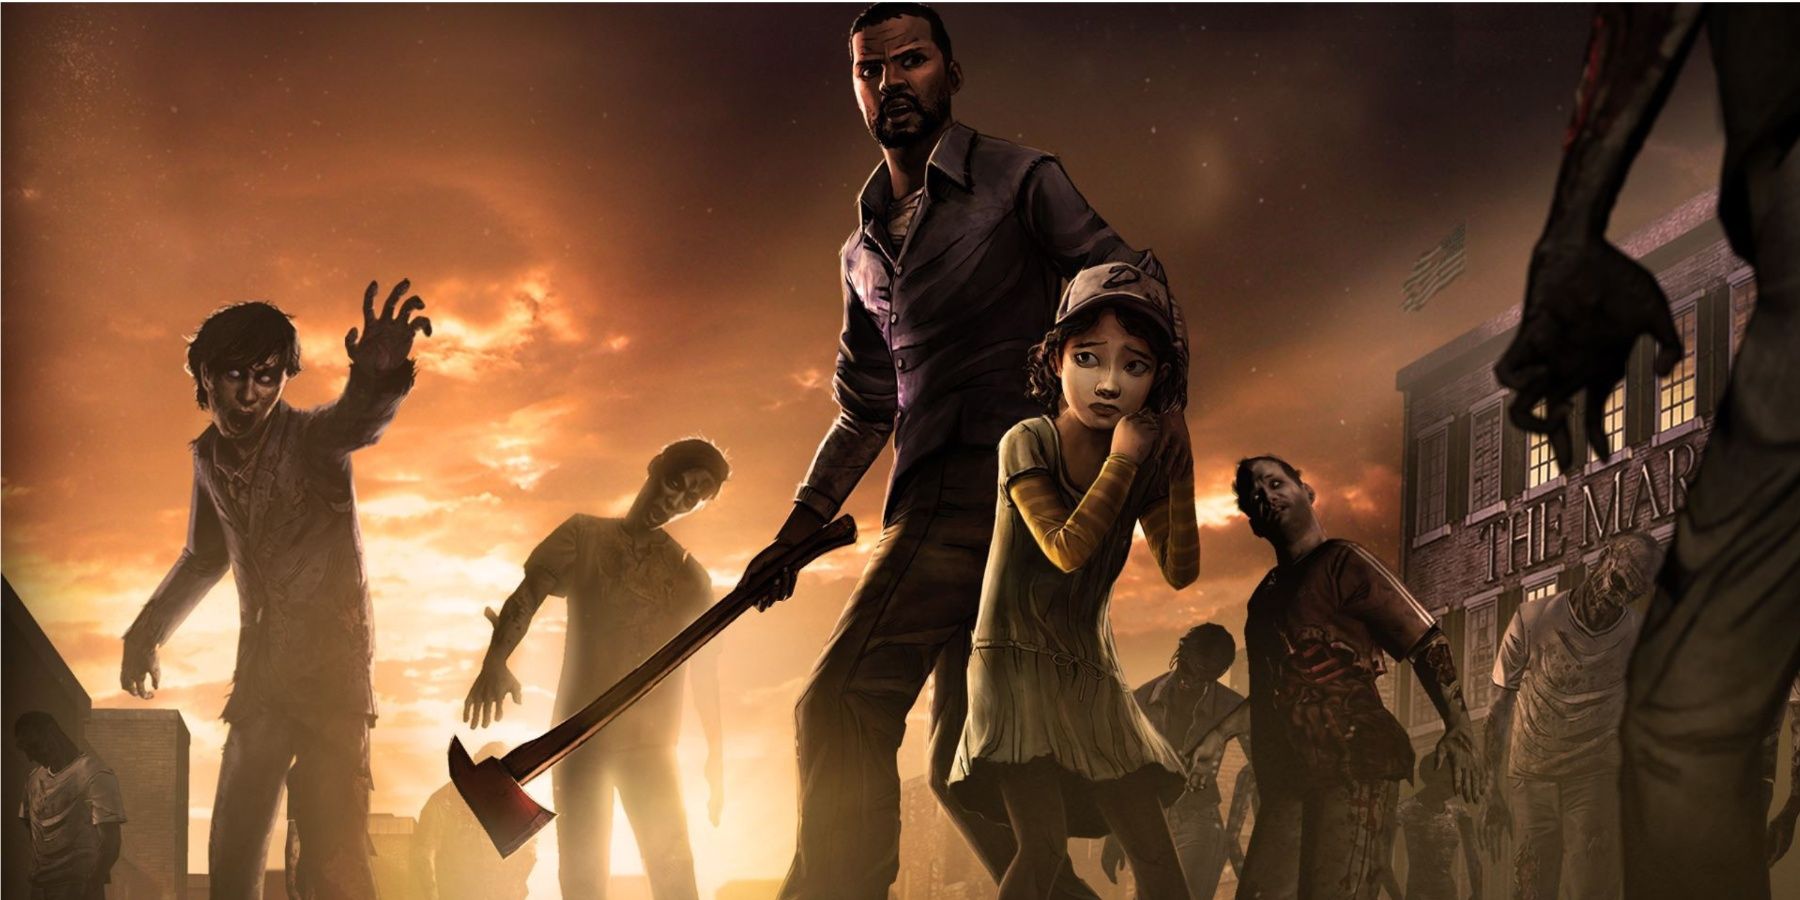 Lee protecting Clementine from walkers in Telltale's The Walking Dead